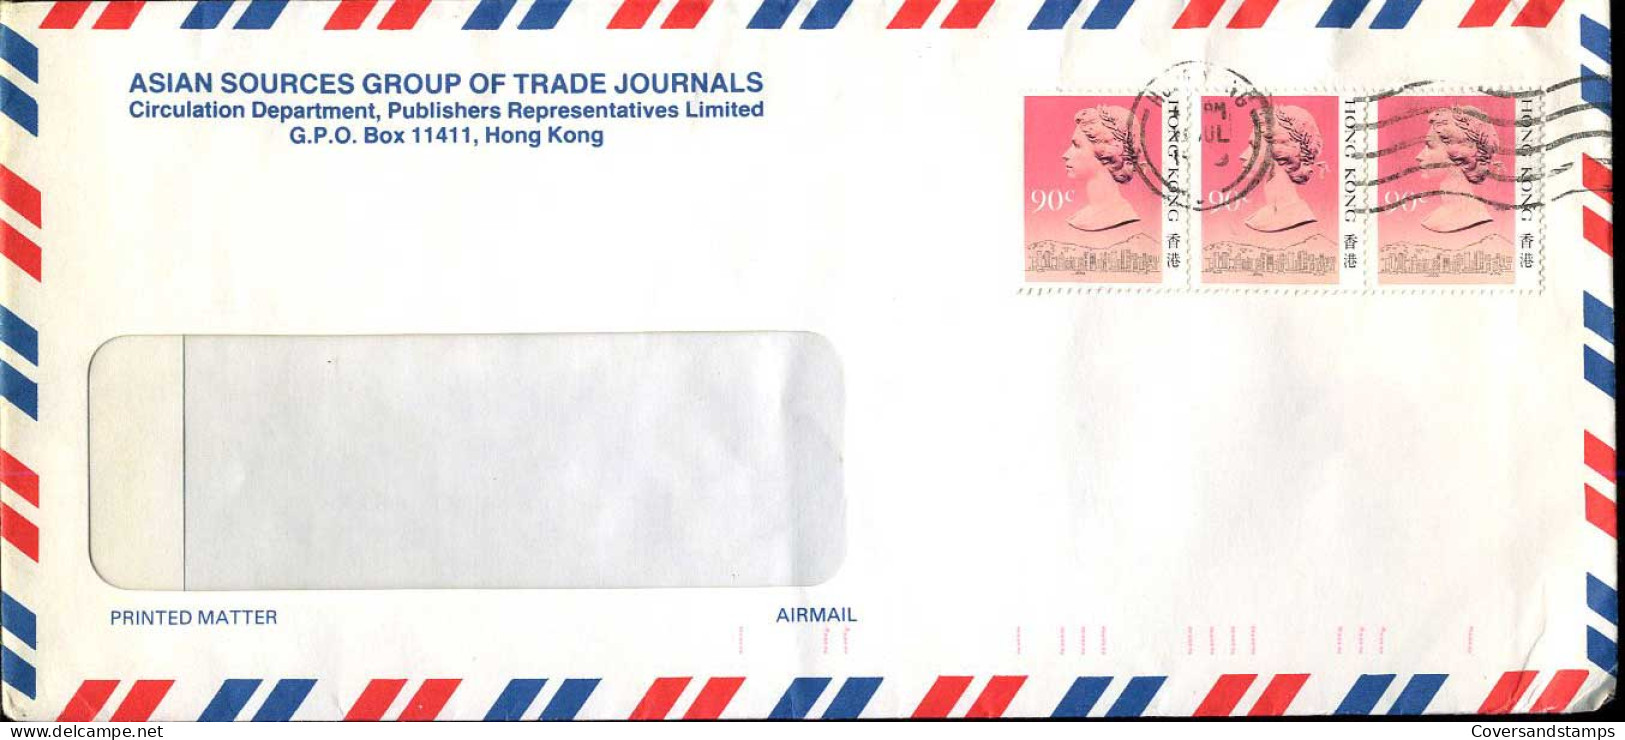 Hong Kong - Cover To Sint-Niklaas, Belgium - Lettres & Documents